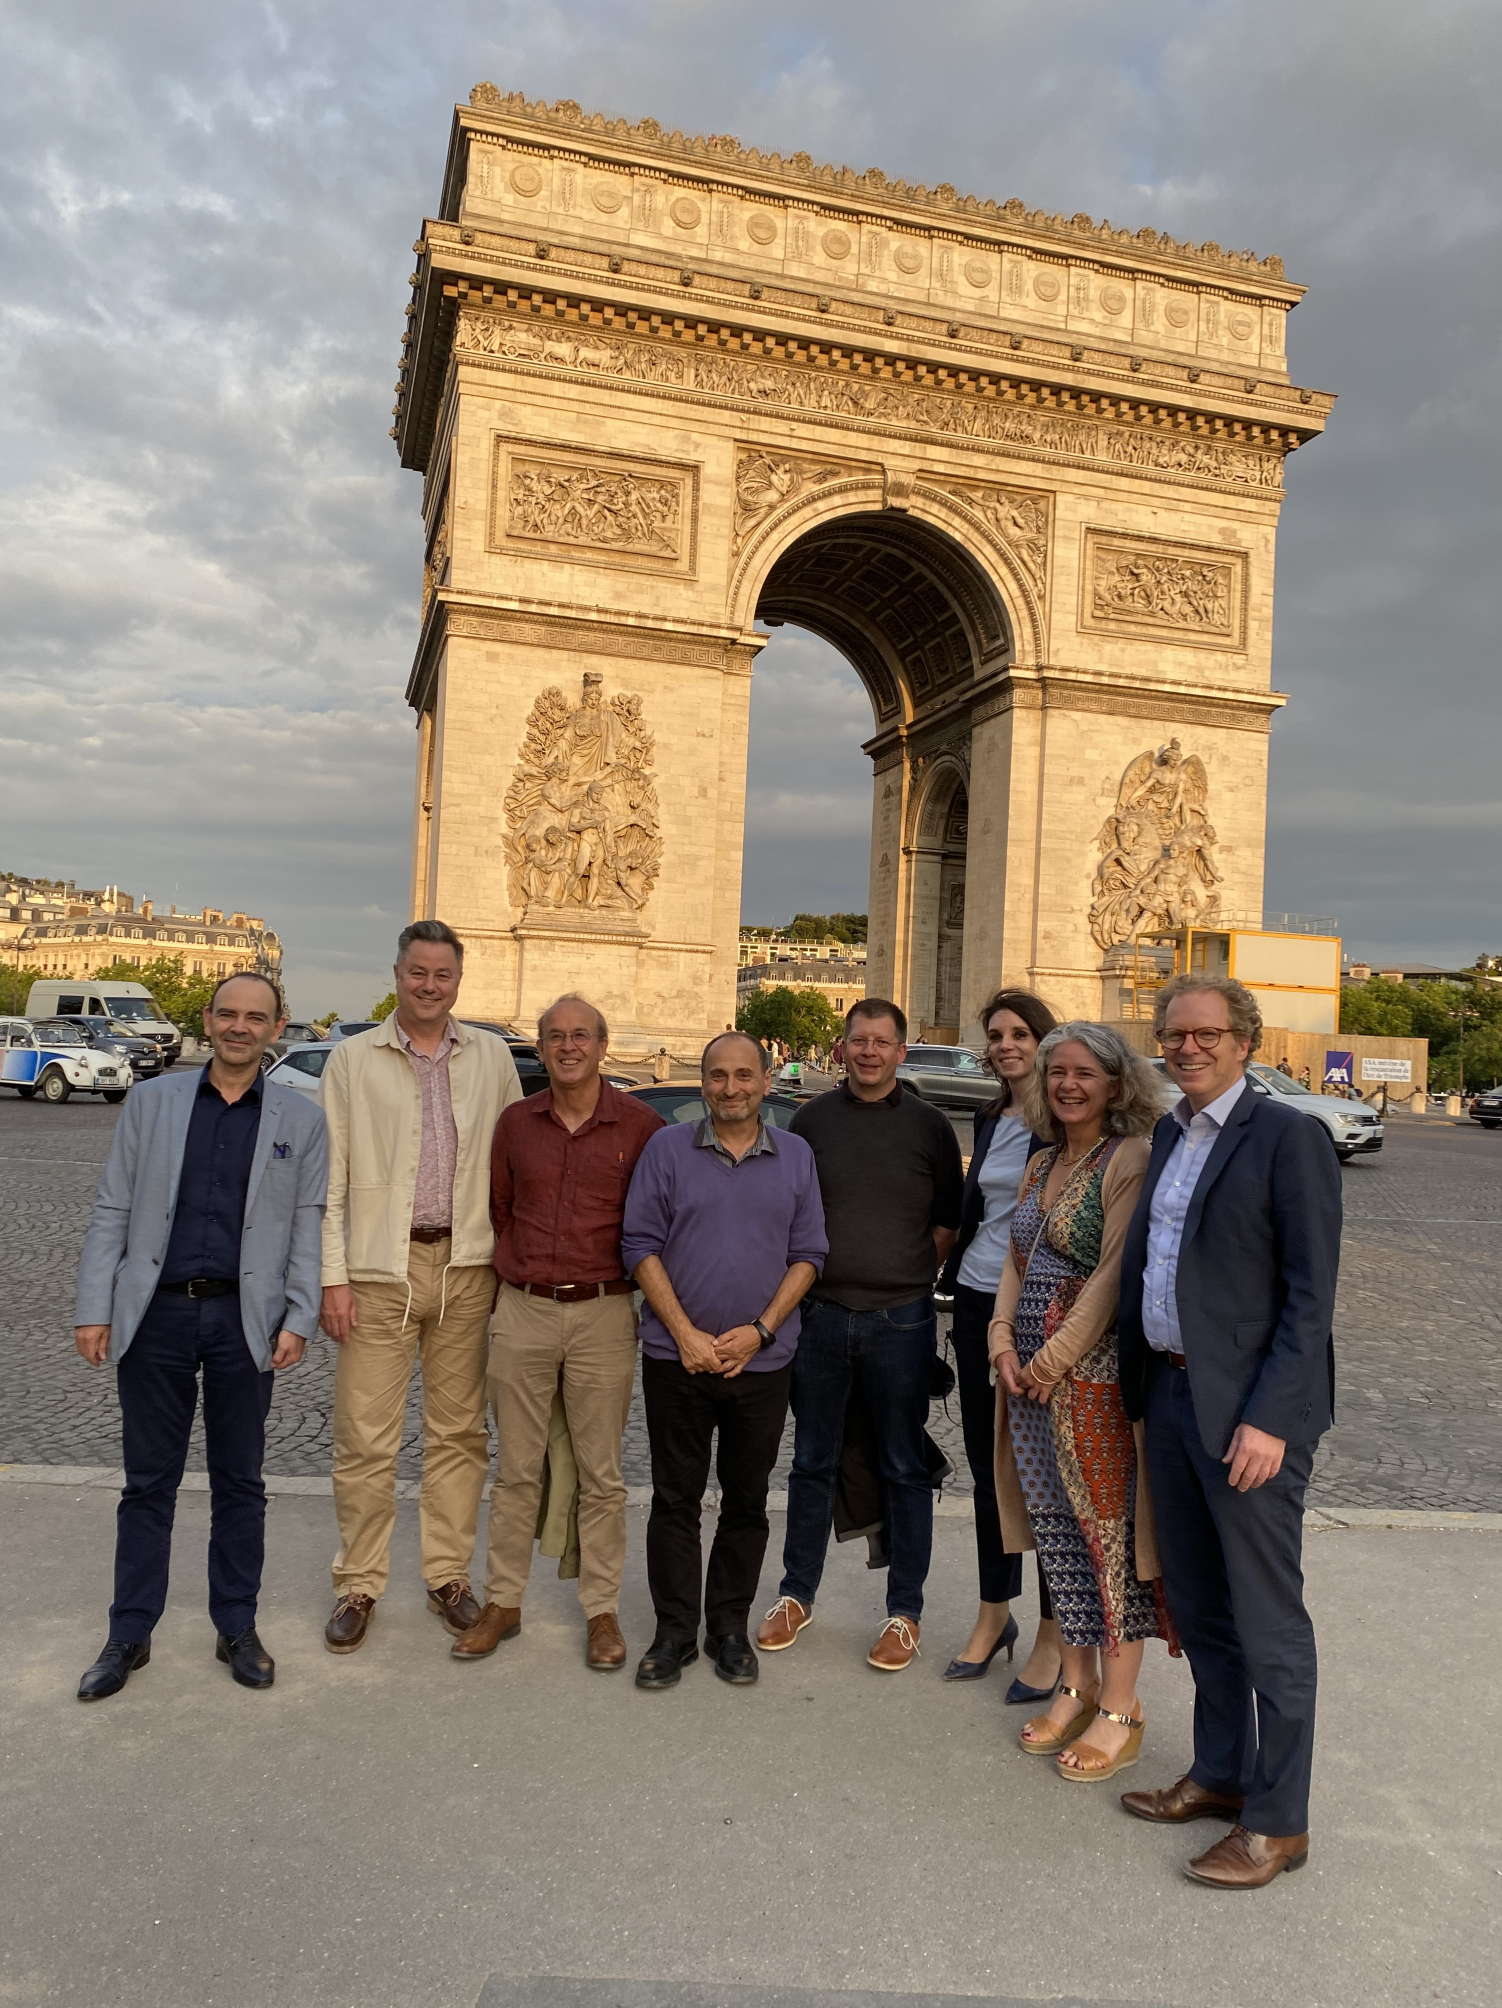 Directors of BioConsult SH, Biotope and HiDef Aerial Surveying Ltd in front of the Arc de Triomphe in Paris.